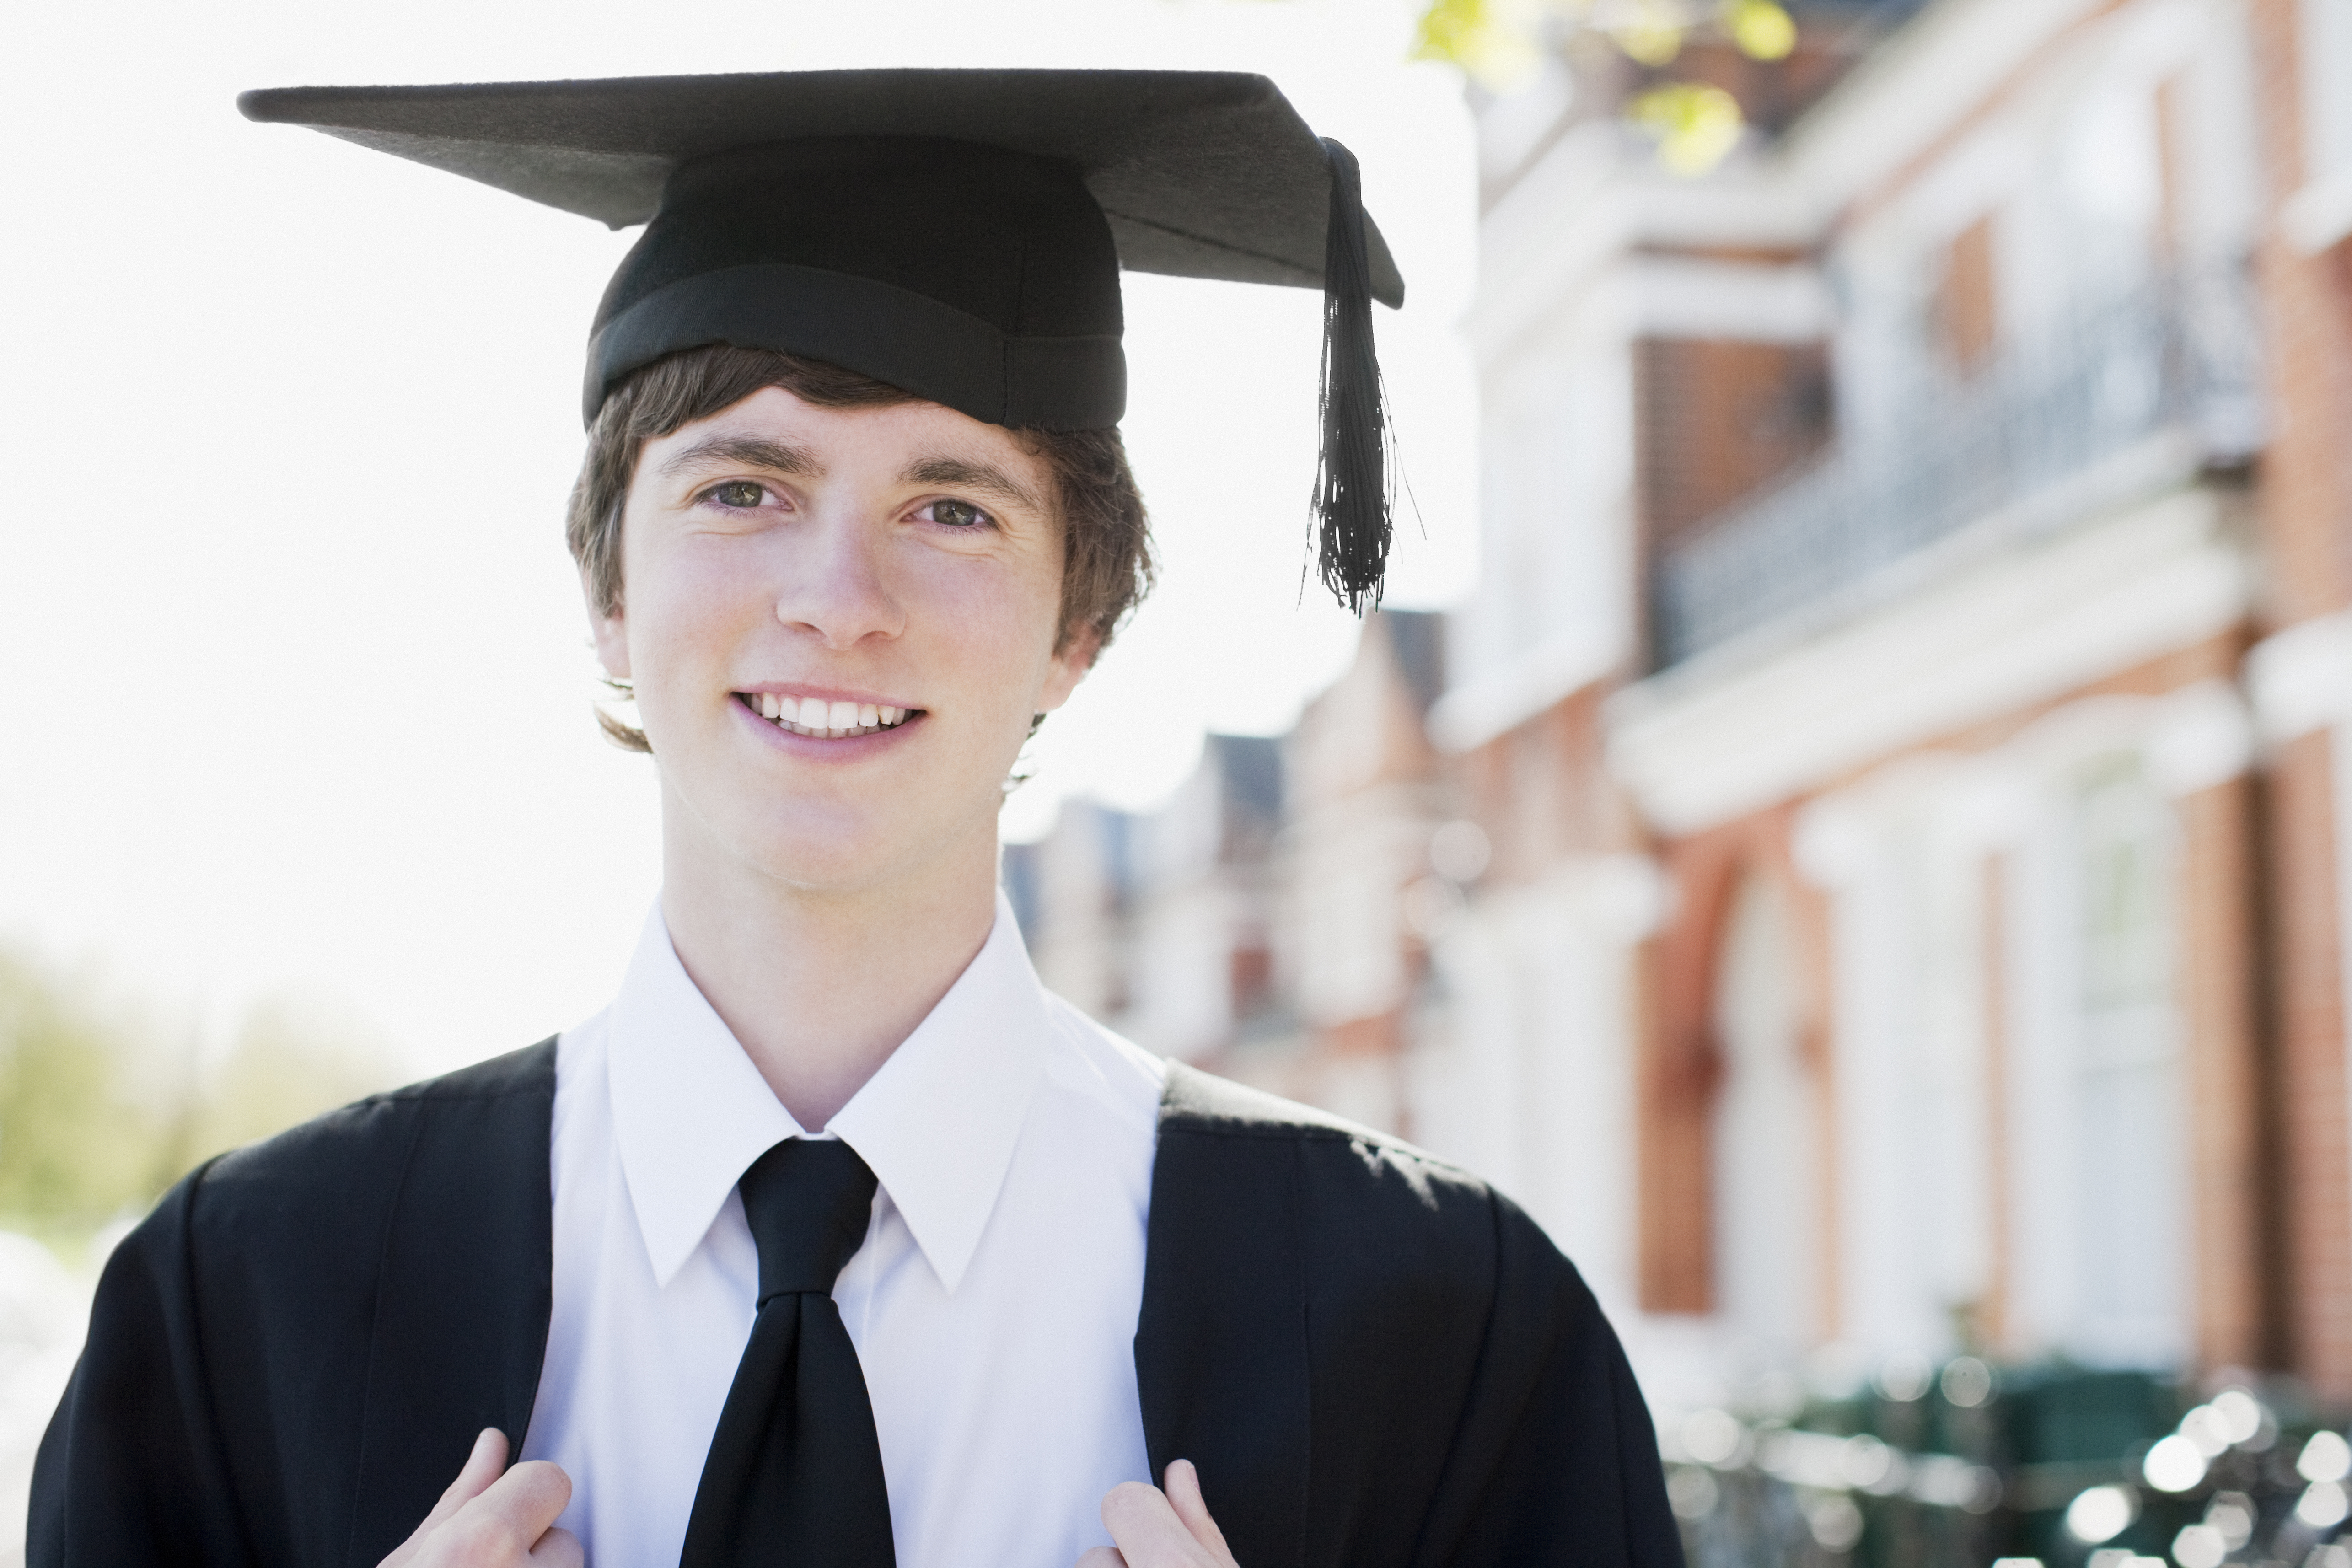 Young man wearing a graduation cap and gown | Source: Getty Images